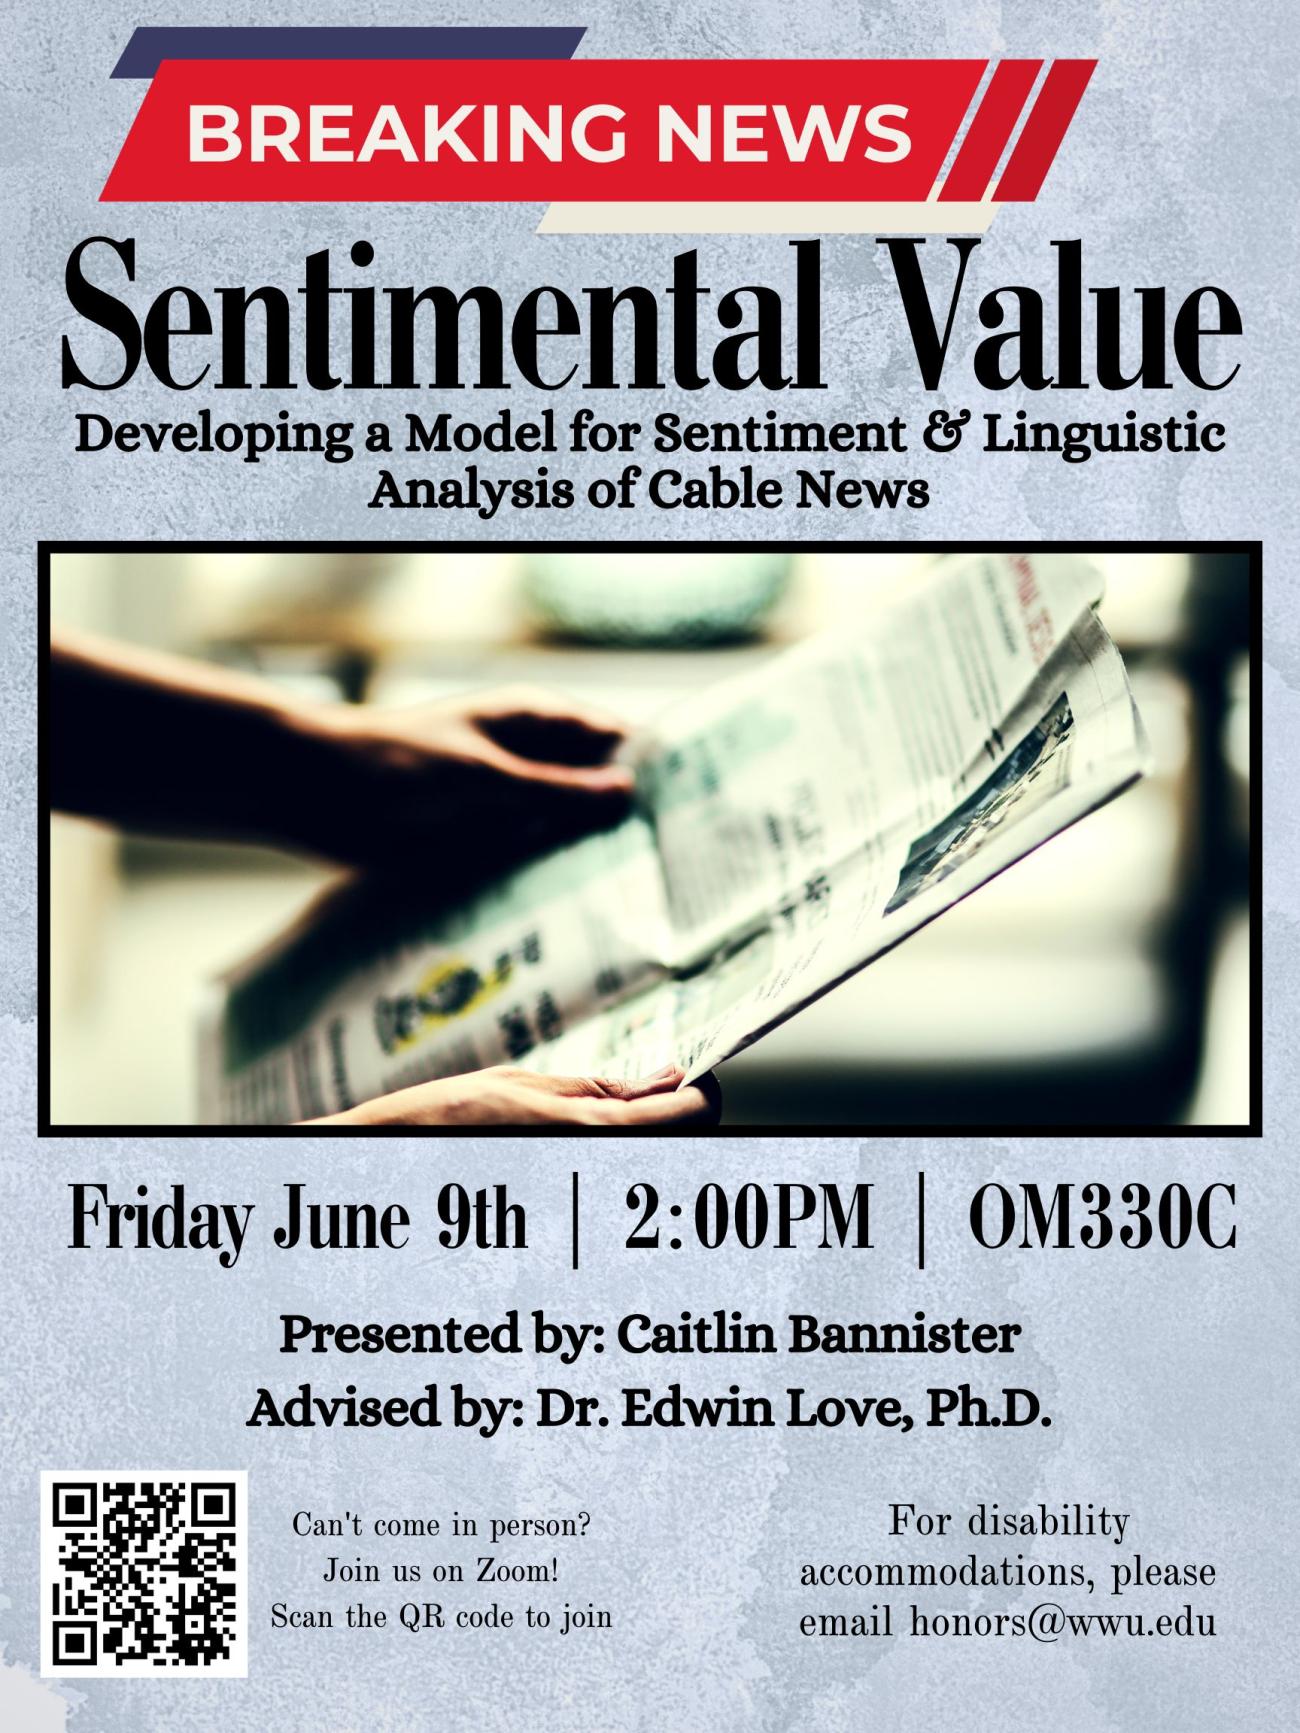 A grey poster with hands holding a newspaper and a QR code. "Breaking news" banner along the top is followed by text that reads: "Sentimental Value: Developing a Model for Sentiment & Linguistic Analysis of Cable News. Friday June 9th | 2:00PM | OM330C; Presented by: Caitlin Bannister; Advised by: Dr. Edwin Love, Ph.D. Can't Come in person? Join us on Zoom! Scan the QR code to join. For disability accommodations, please email honors@wwu.edu."